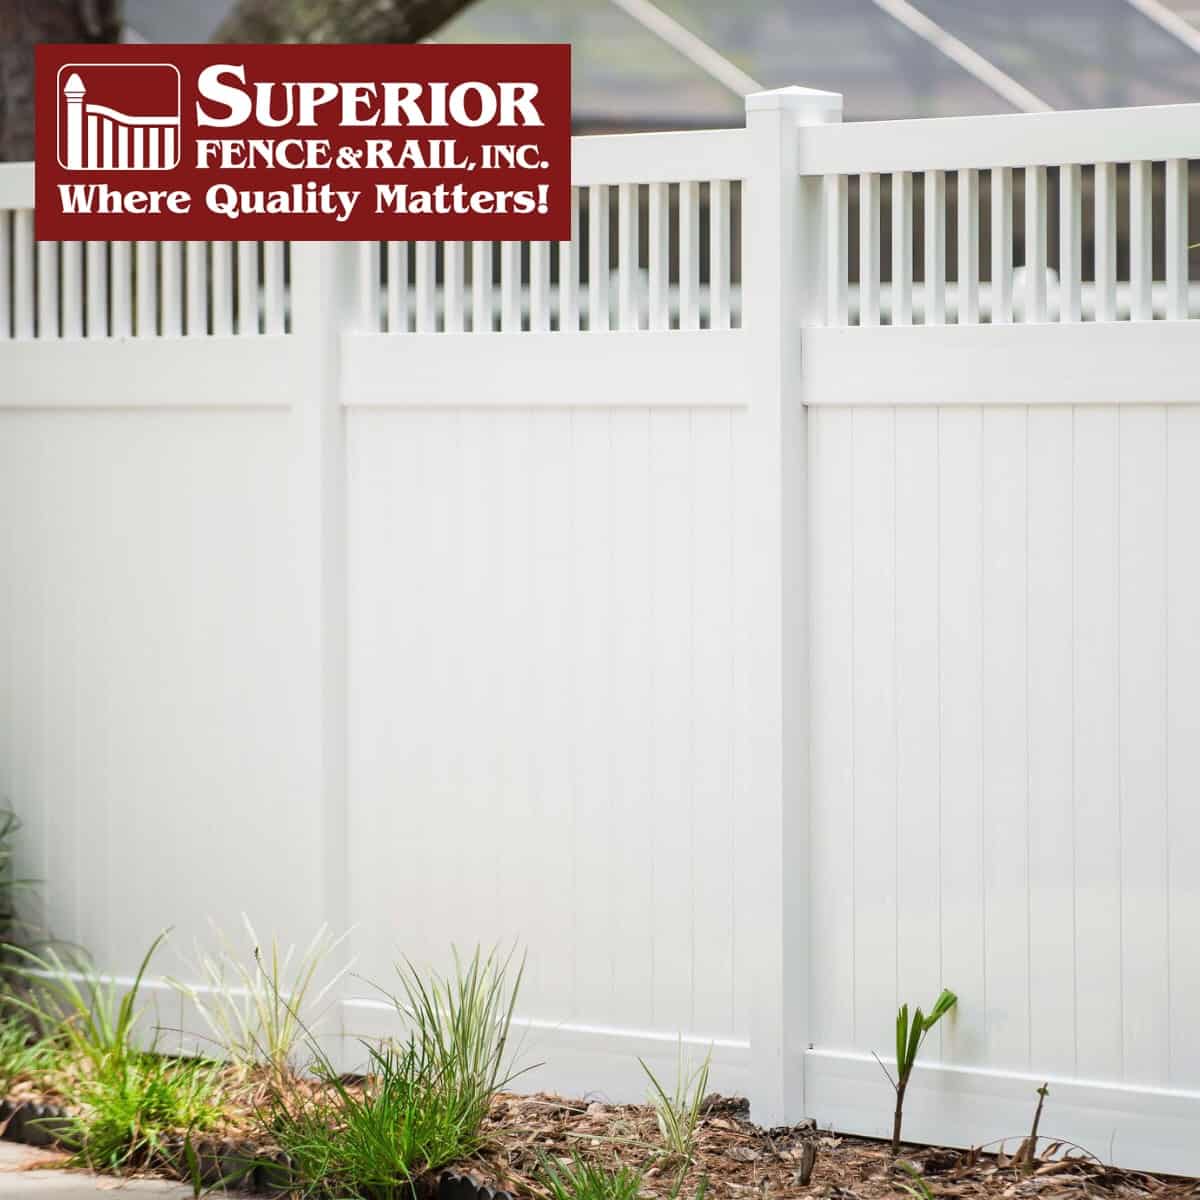 Northern Kentucky Fence Company Contractor